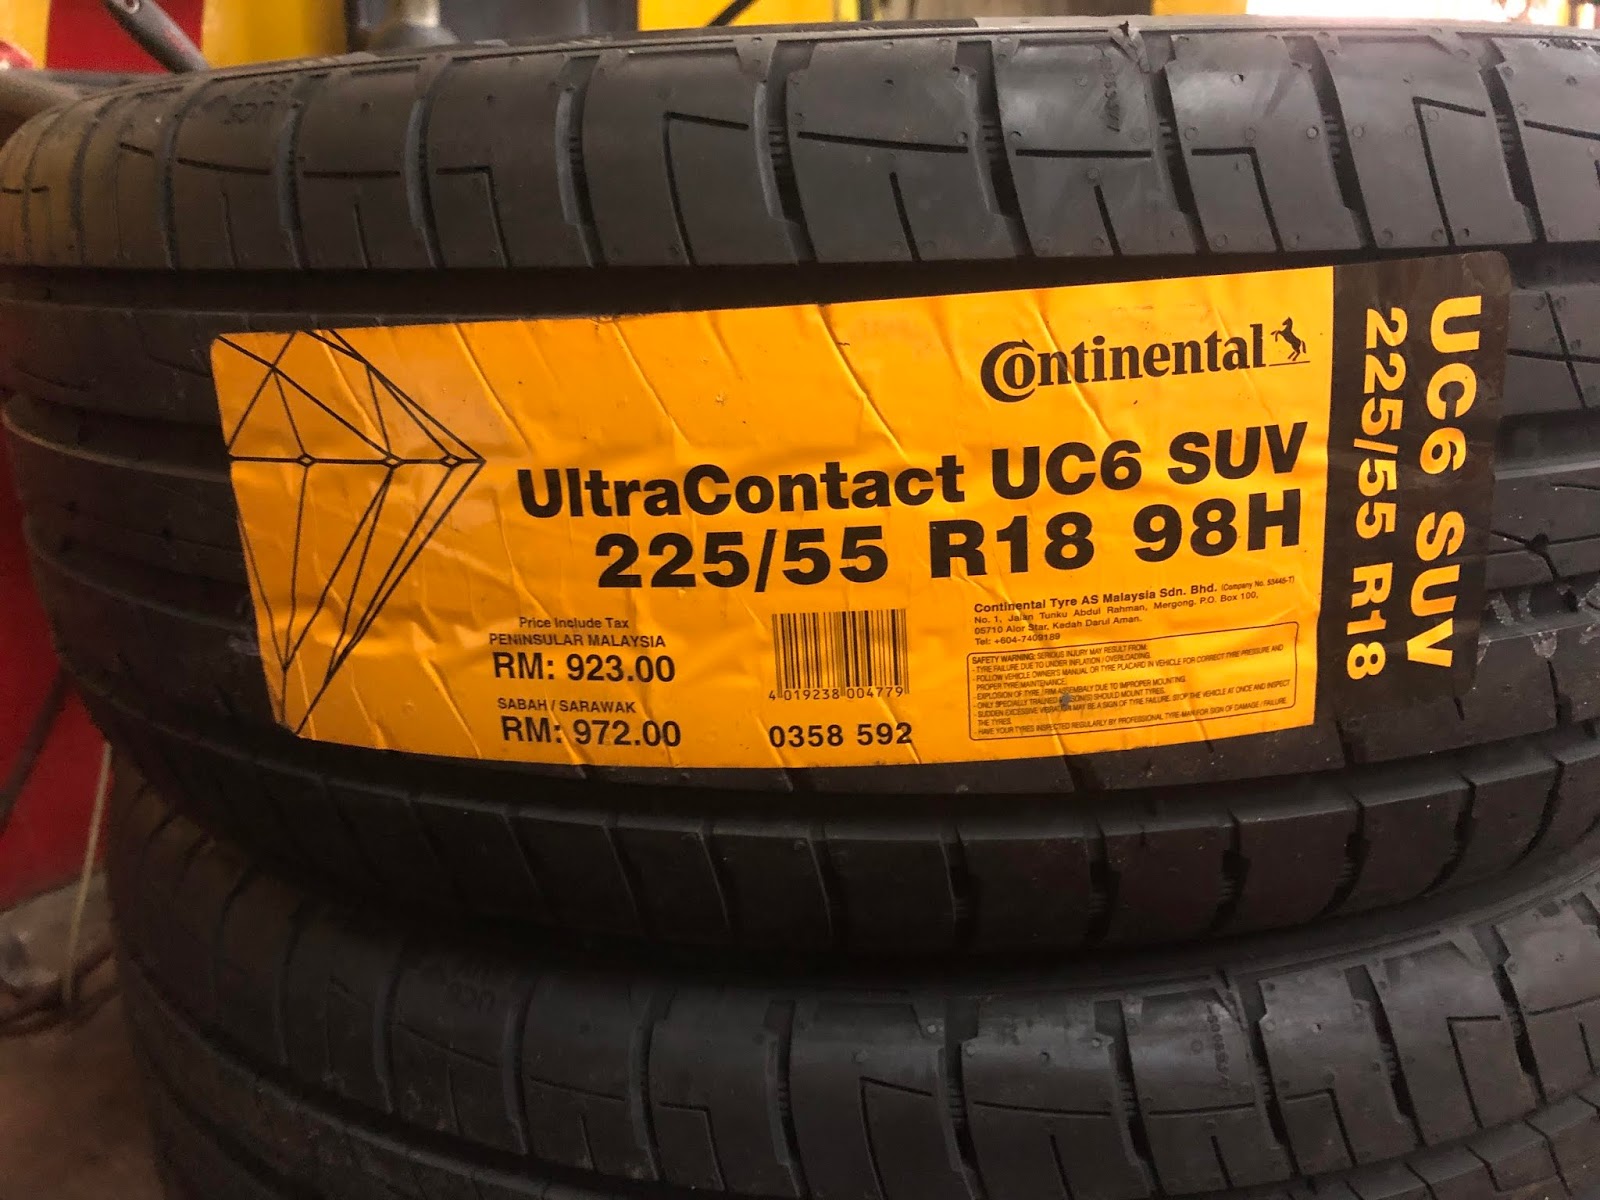 Continental ultracontact uc6. Continental ULTRACONTACT 195/65 r15. Continental (Континенталь) ULTRACONTACT 195/65 r15. Continental ULTRACONTACT 205/55 r16. Continental ULTRACONTACT uc6 SUV.